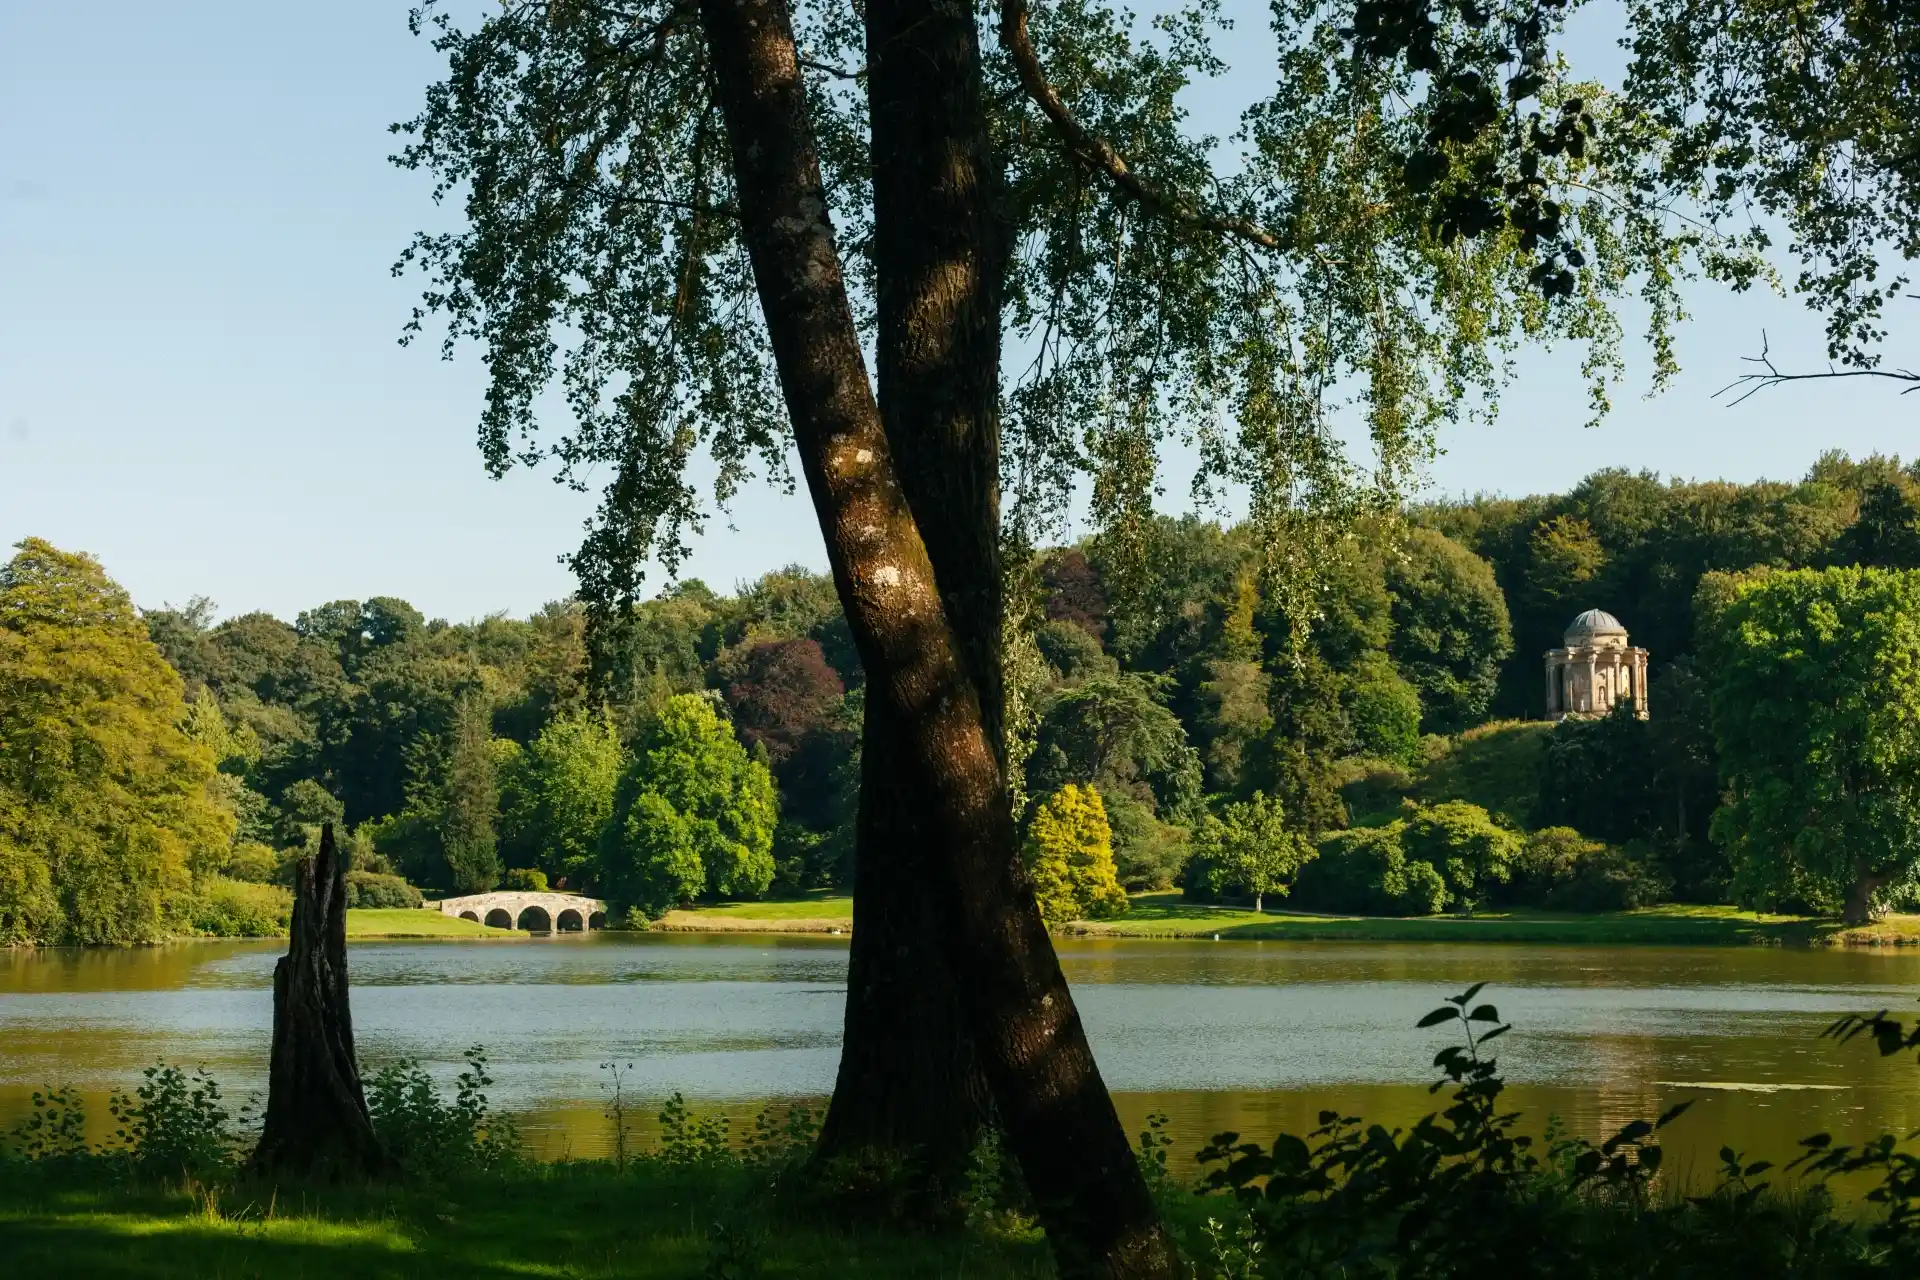 Stourhead Gardens view with Palladian Bridge and the temple of Apollo in view across the lake and many green trees and grass in foreground and background.